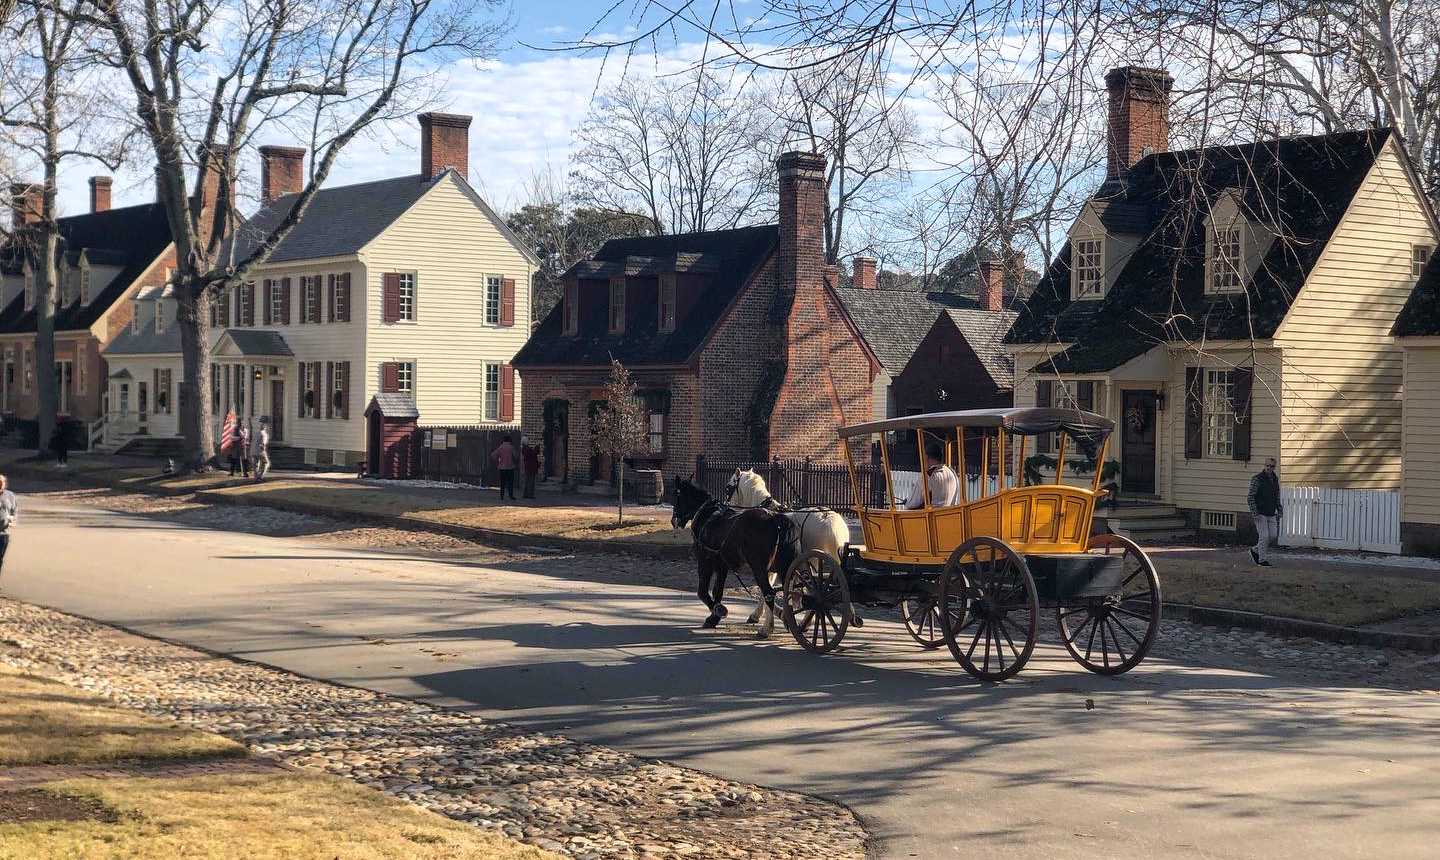 Imagine what it was like to travel by horse and buggy through the streets of Williamsburg at Christmas time!